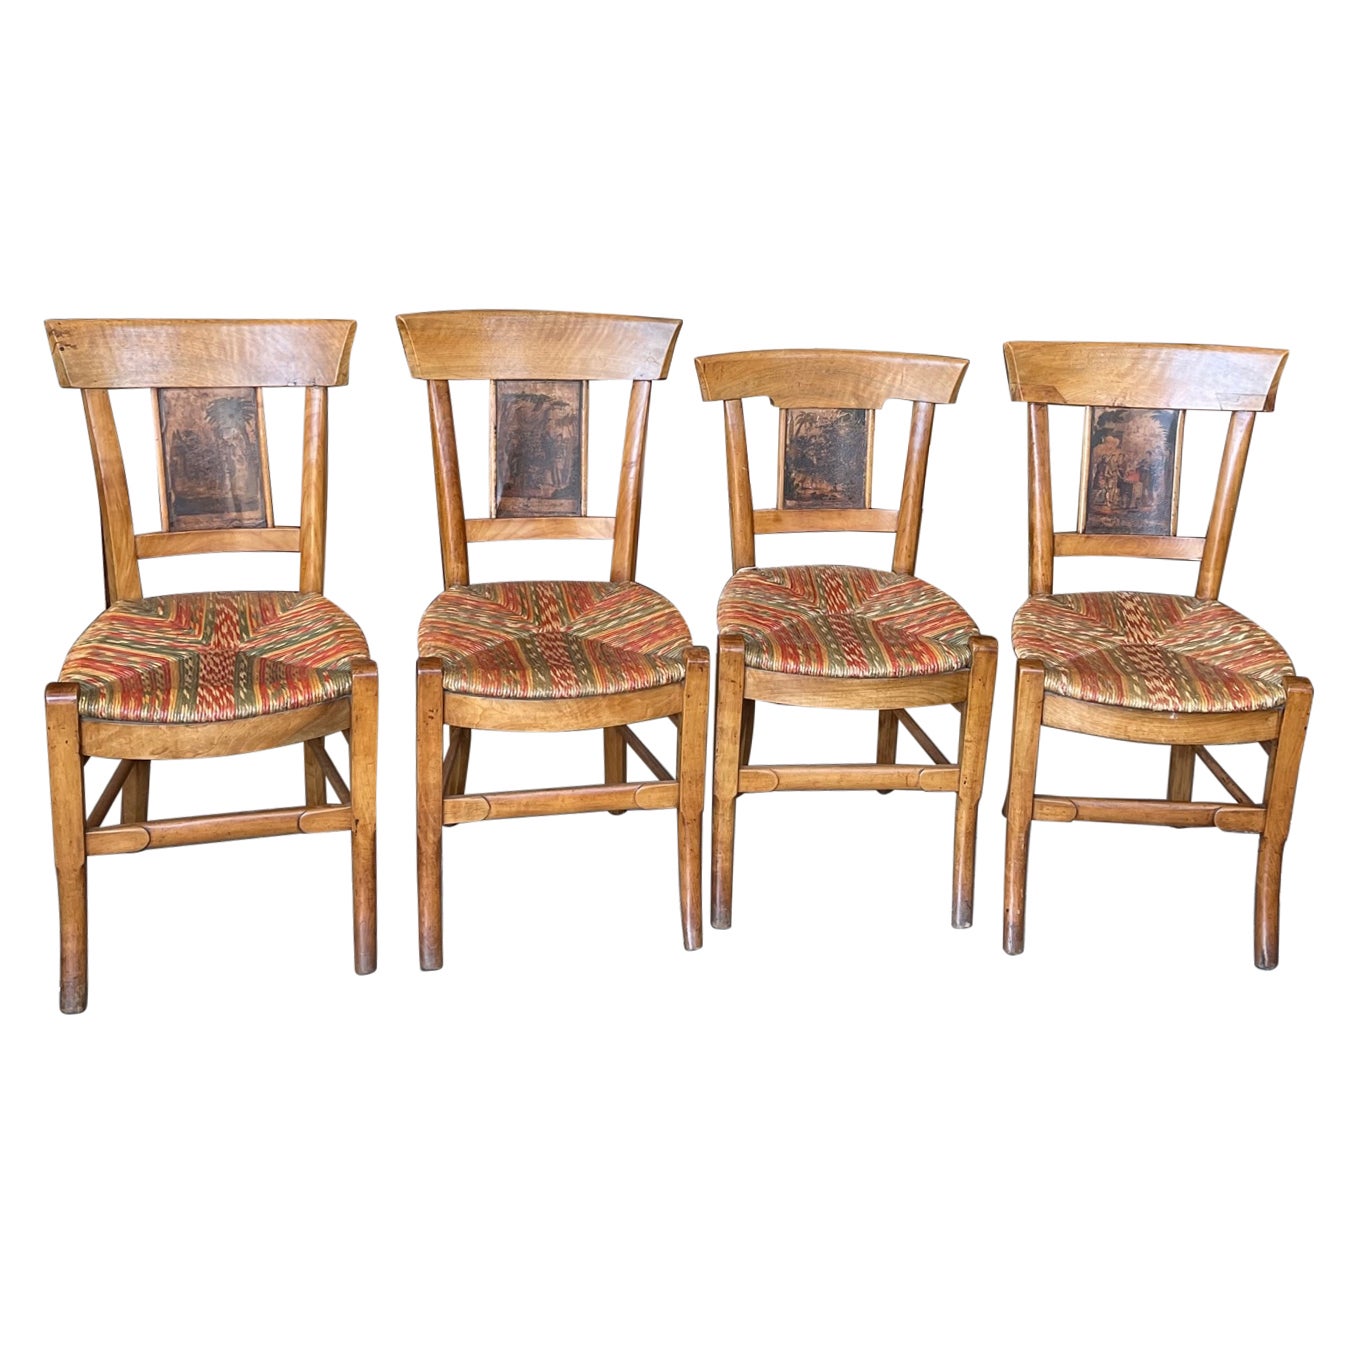 2 French 19th Century Fruitwood Les Incas Side Chairs with Original Rush Seats For Sale 1